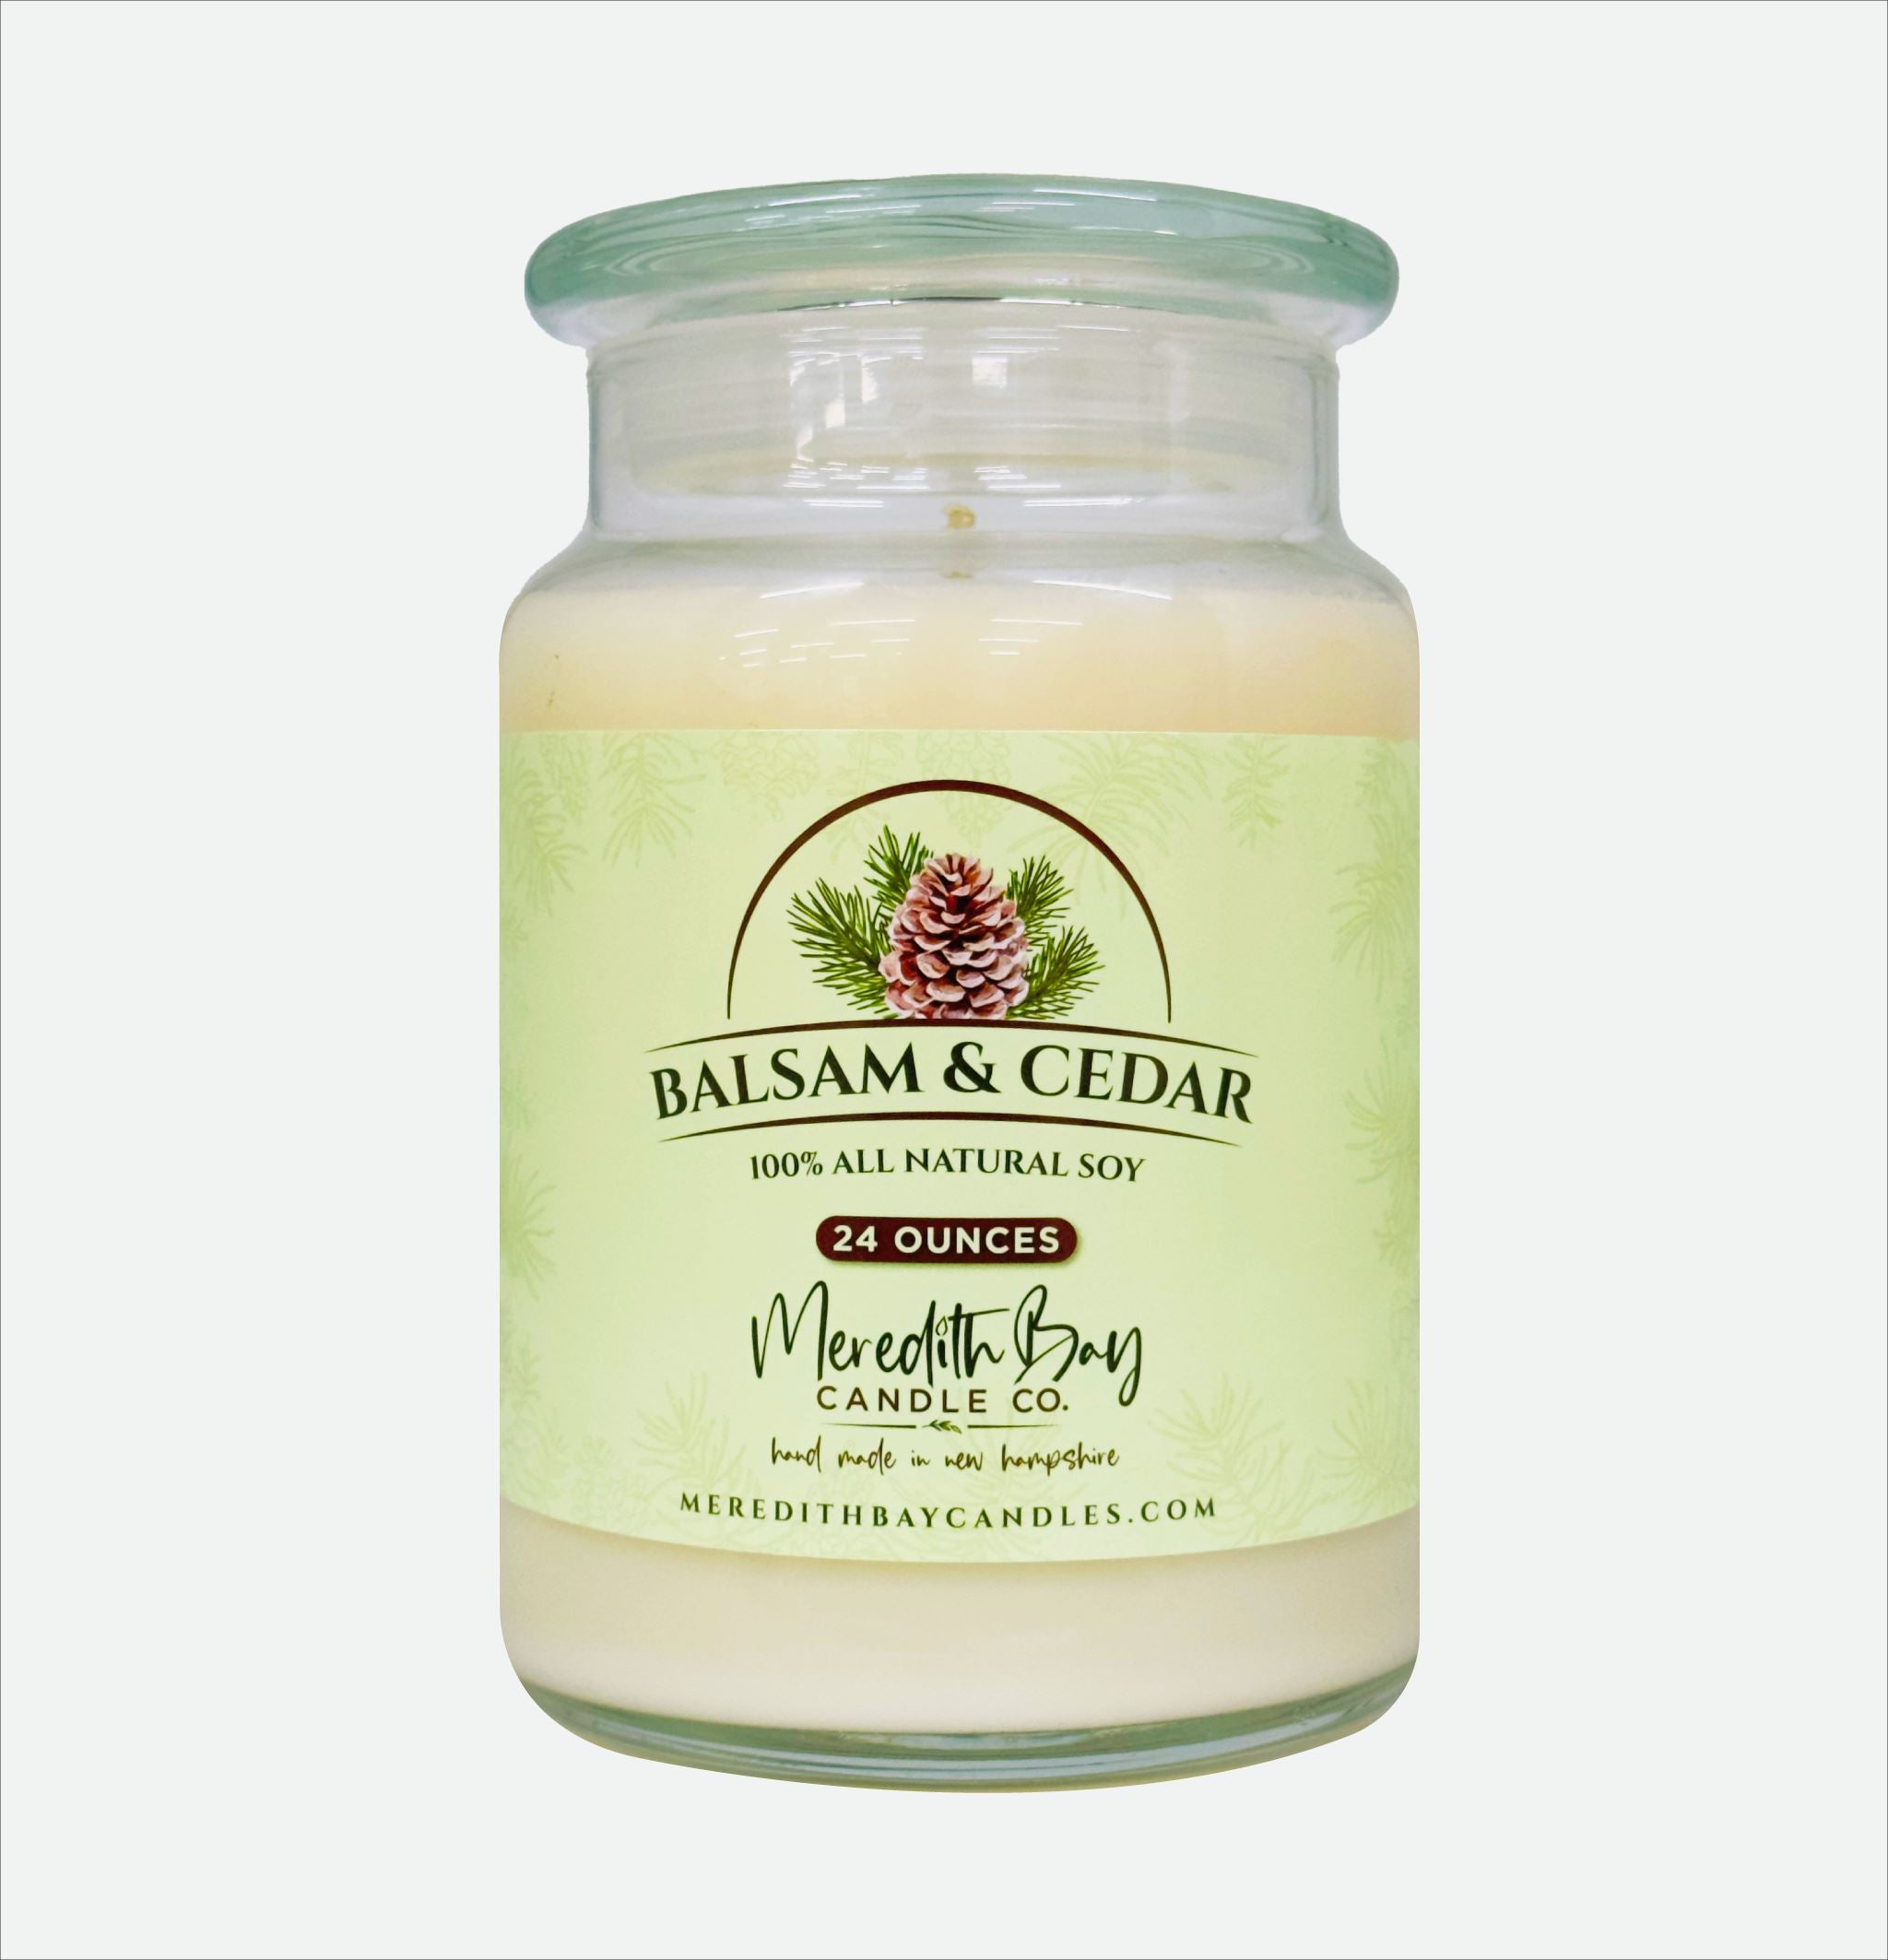 Balsam & Cedar Soy Candle Soy Candle Meredith Bay Candle Co 24.0 Oz 